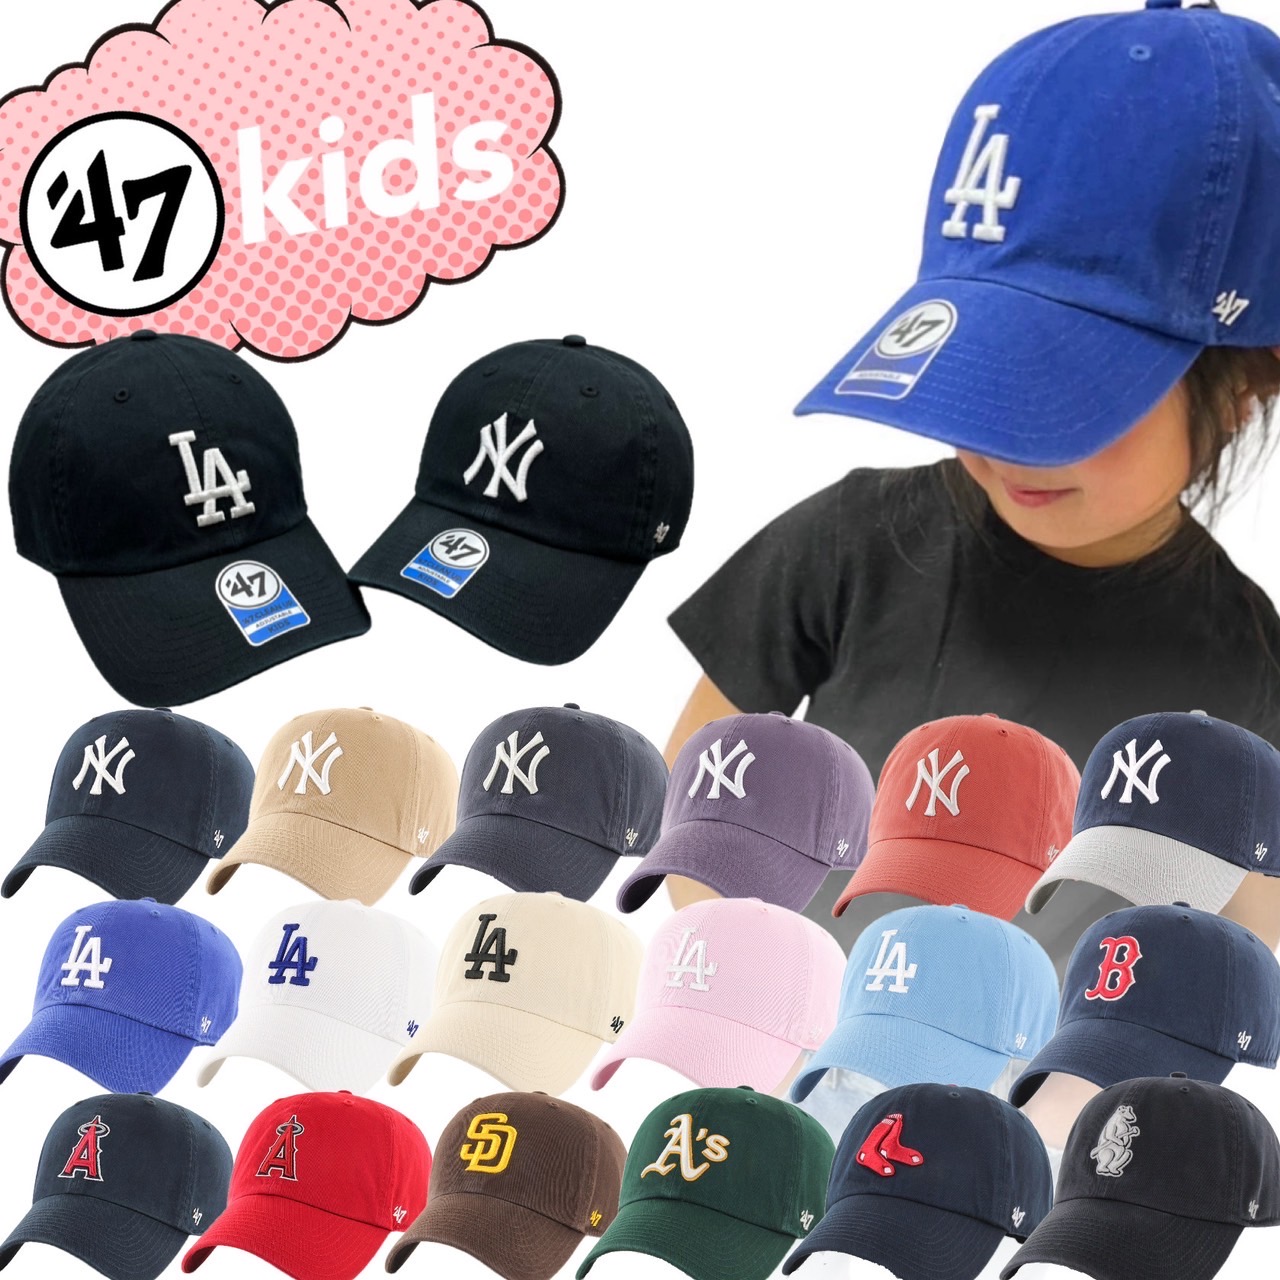 47 four tea seven brand cap doja-sLAyan Keith enzerus Kids hat child man and woman use clean nap embroidery Logo 47BRAND KIDS CLEAN UP